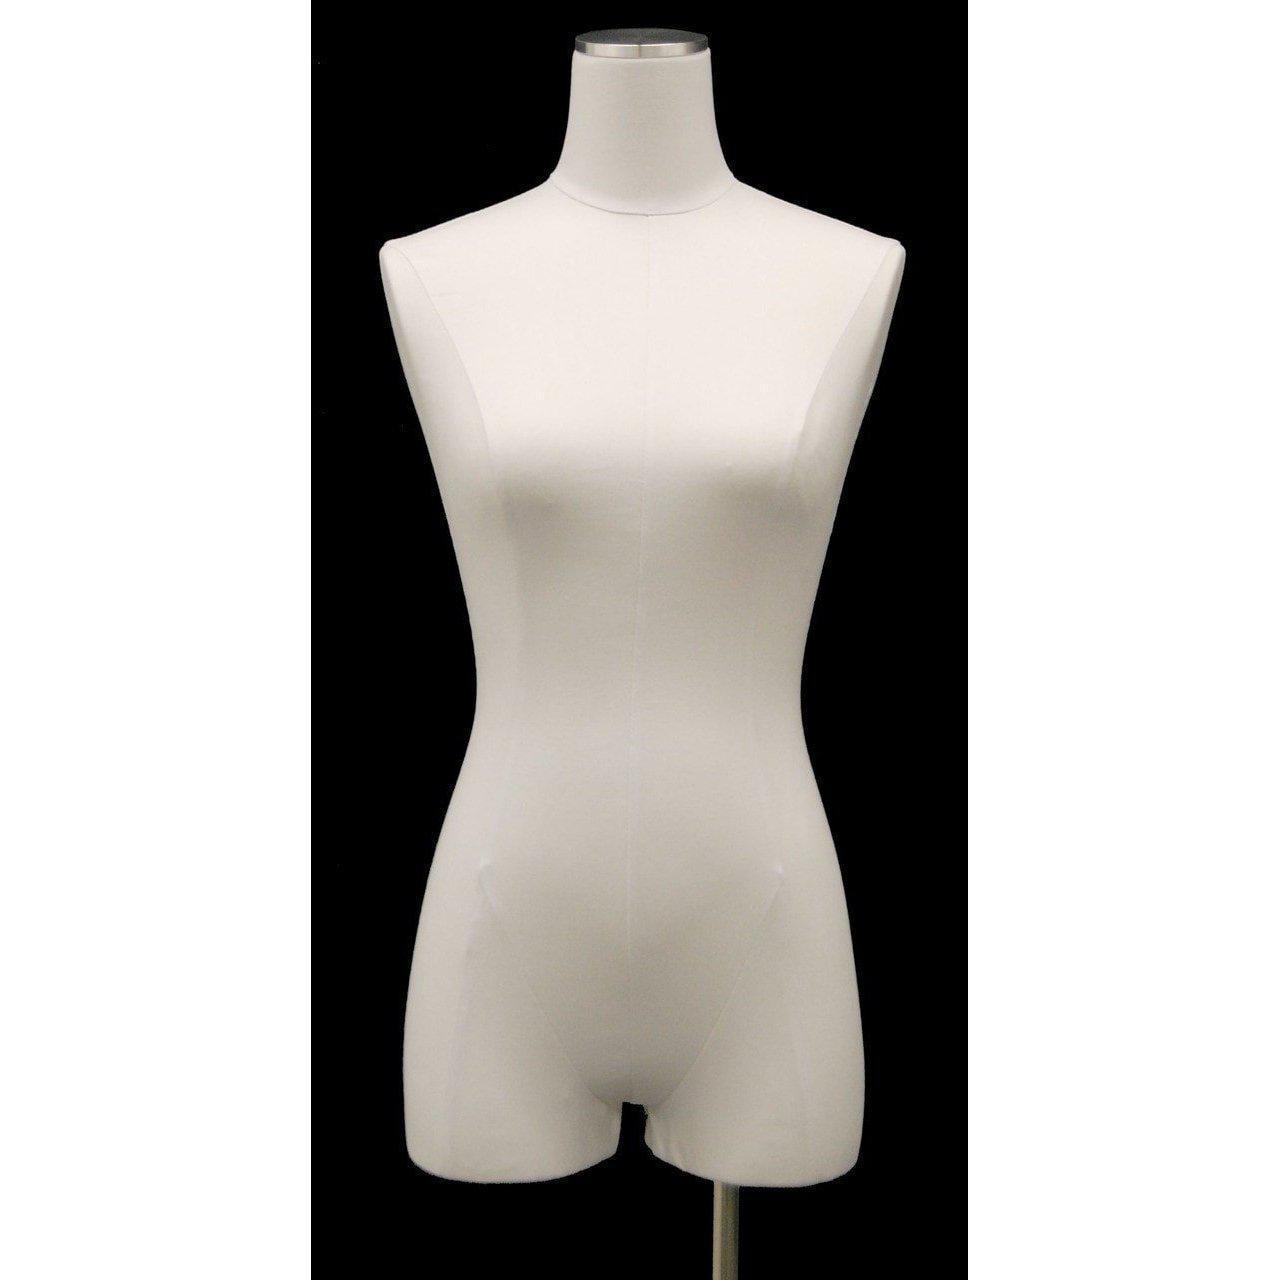 Adult Female Adjustable Dress Form Sewing Mannequin Fabric Torso With 12  Adjustment Dials FH-2-8 